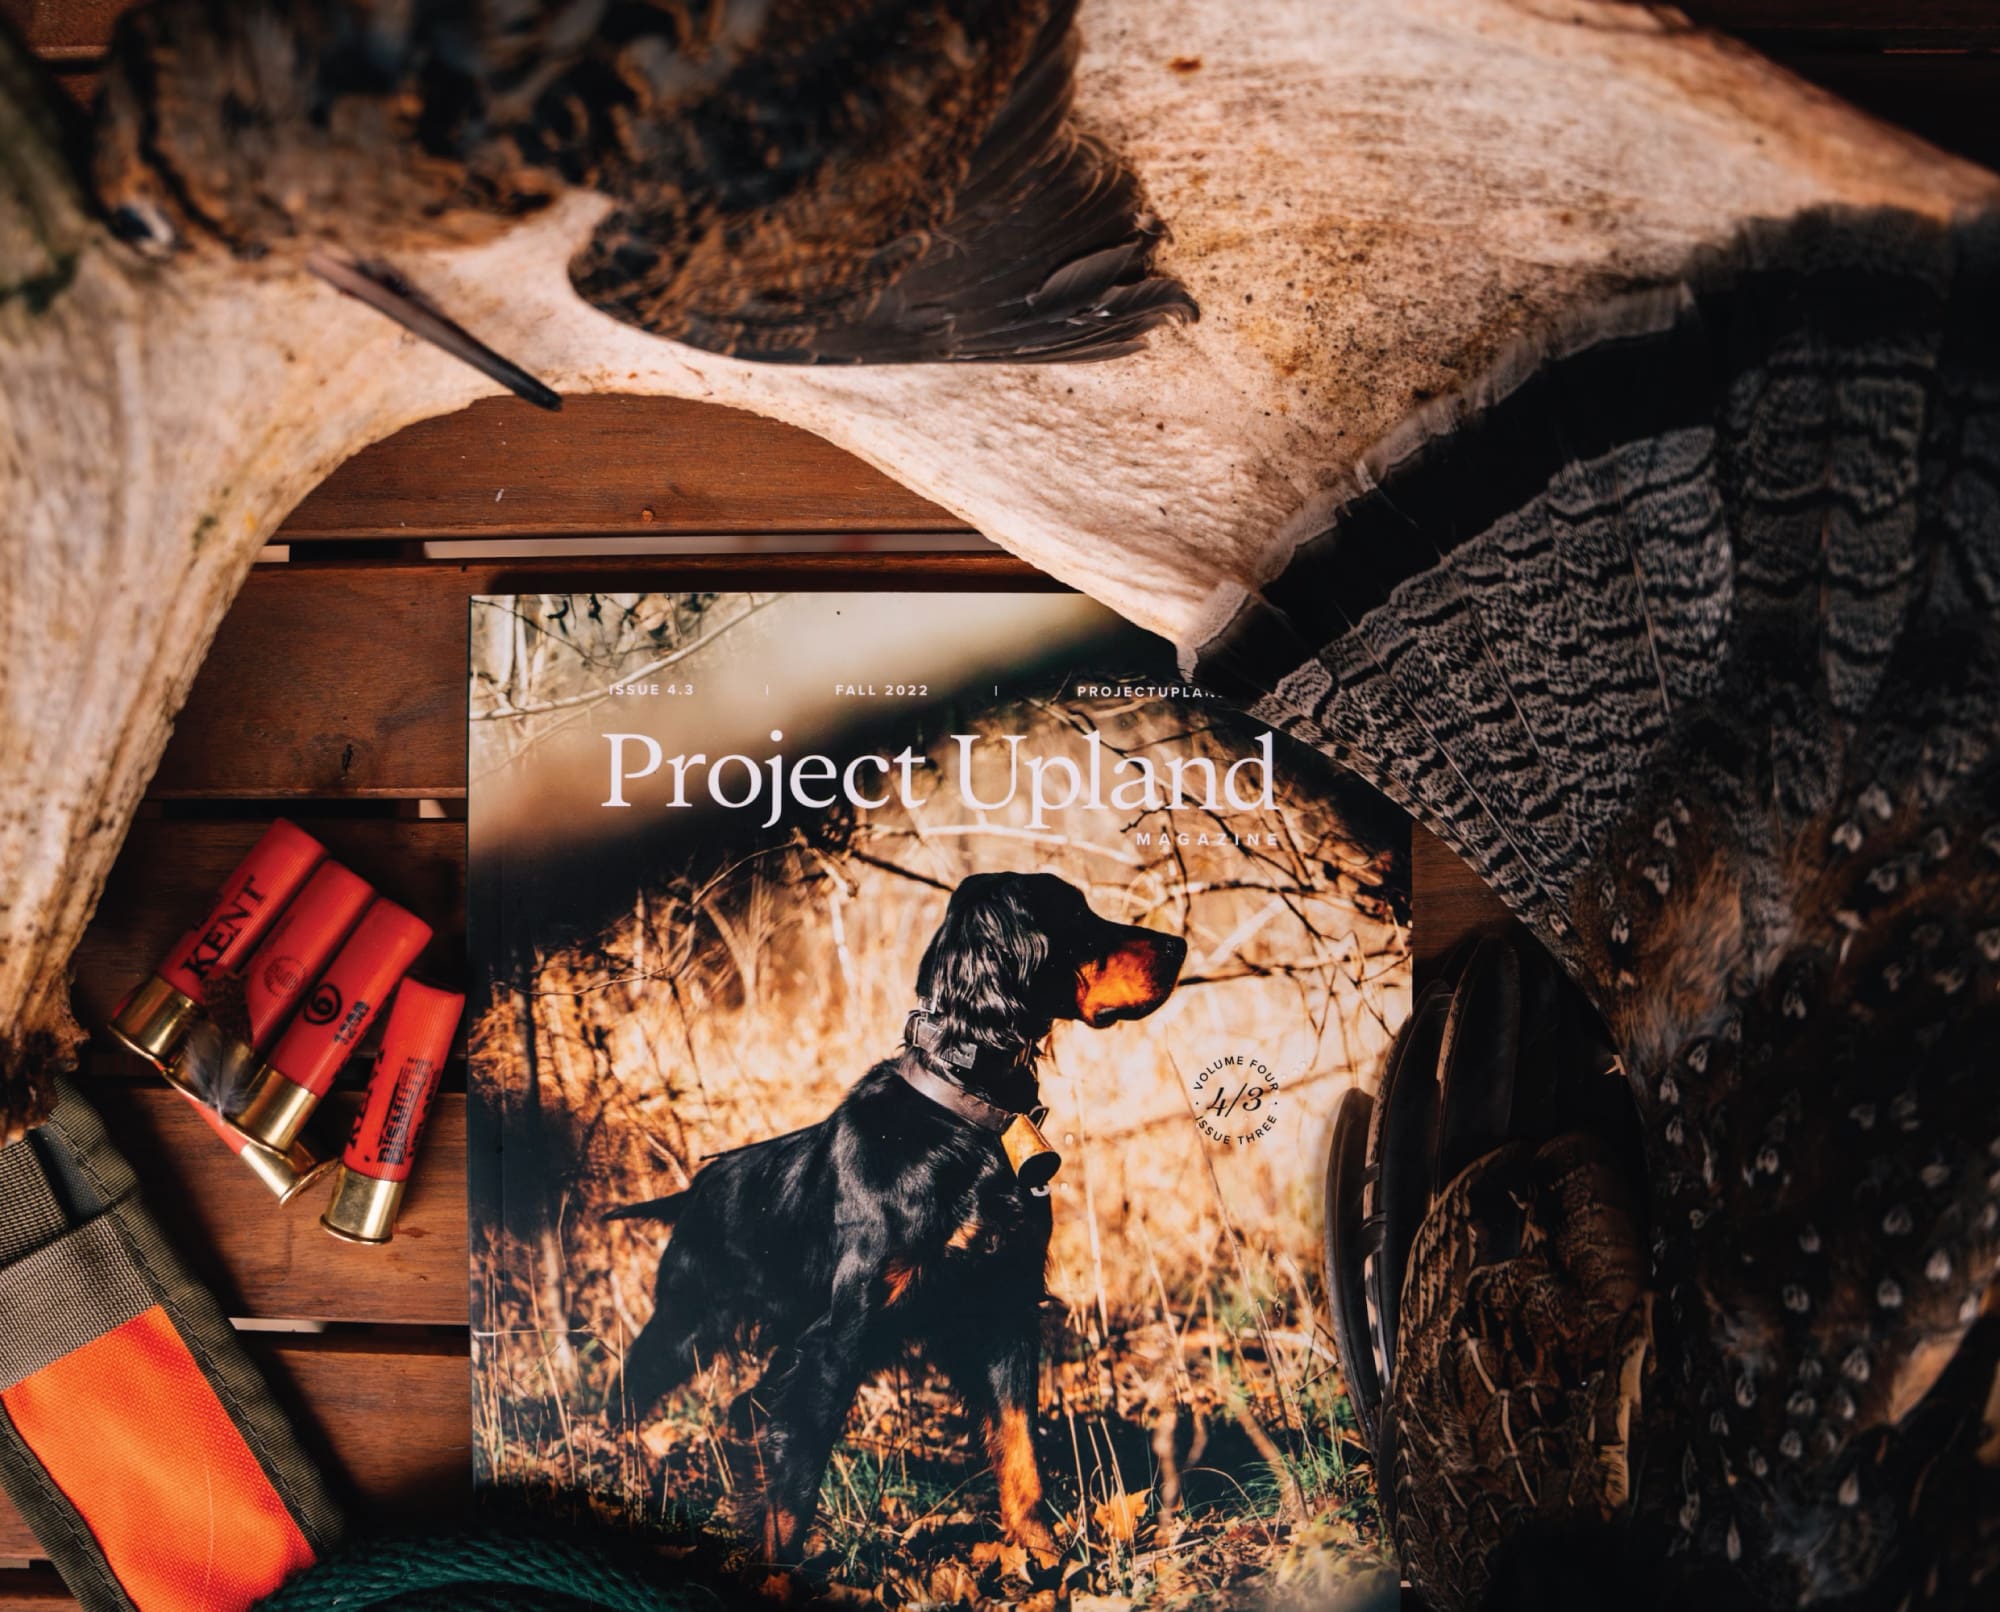 Project Upland Magazine with some bird hunting gear on a table